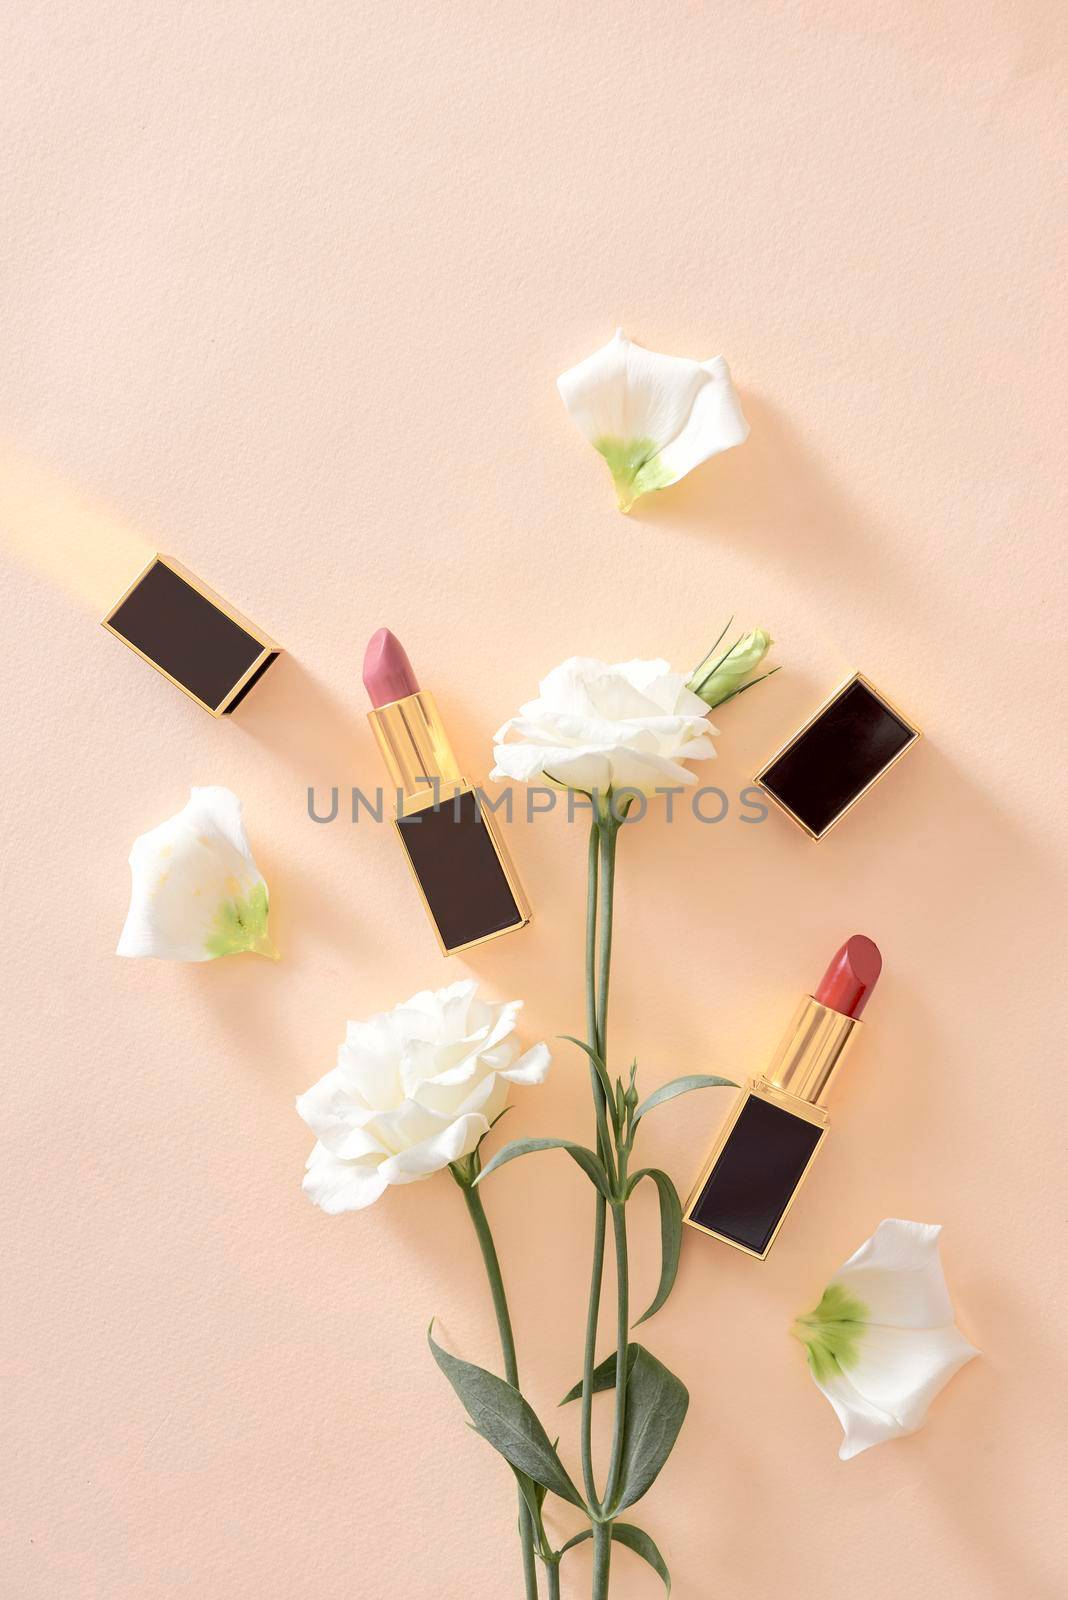 Red lipstick make up and flowers arranged on a pastel purple background with empty space at side